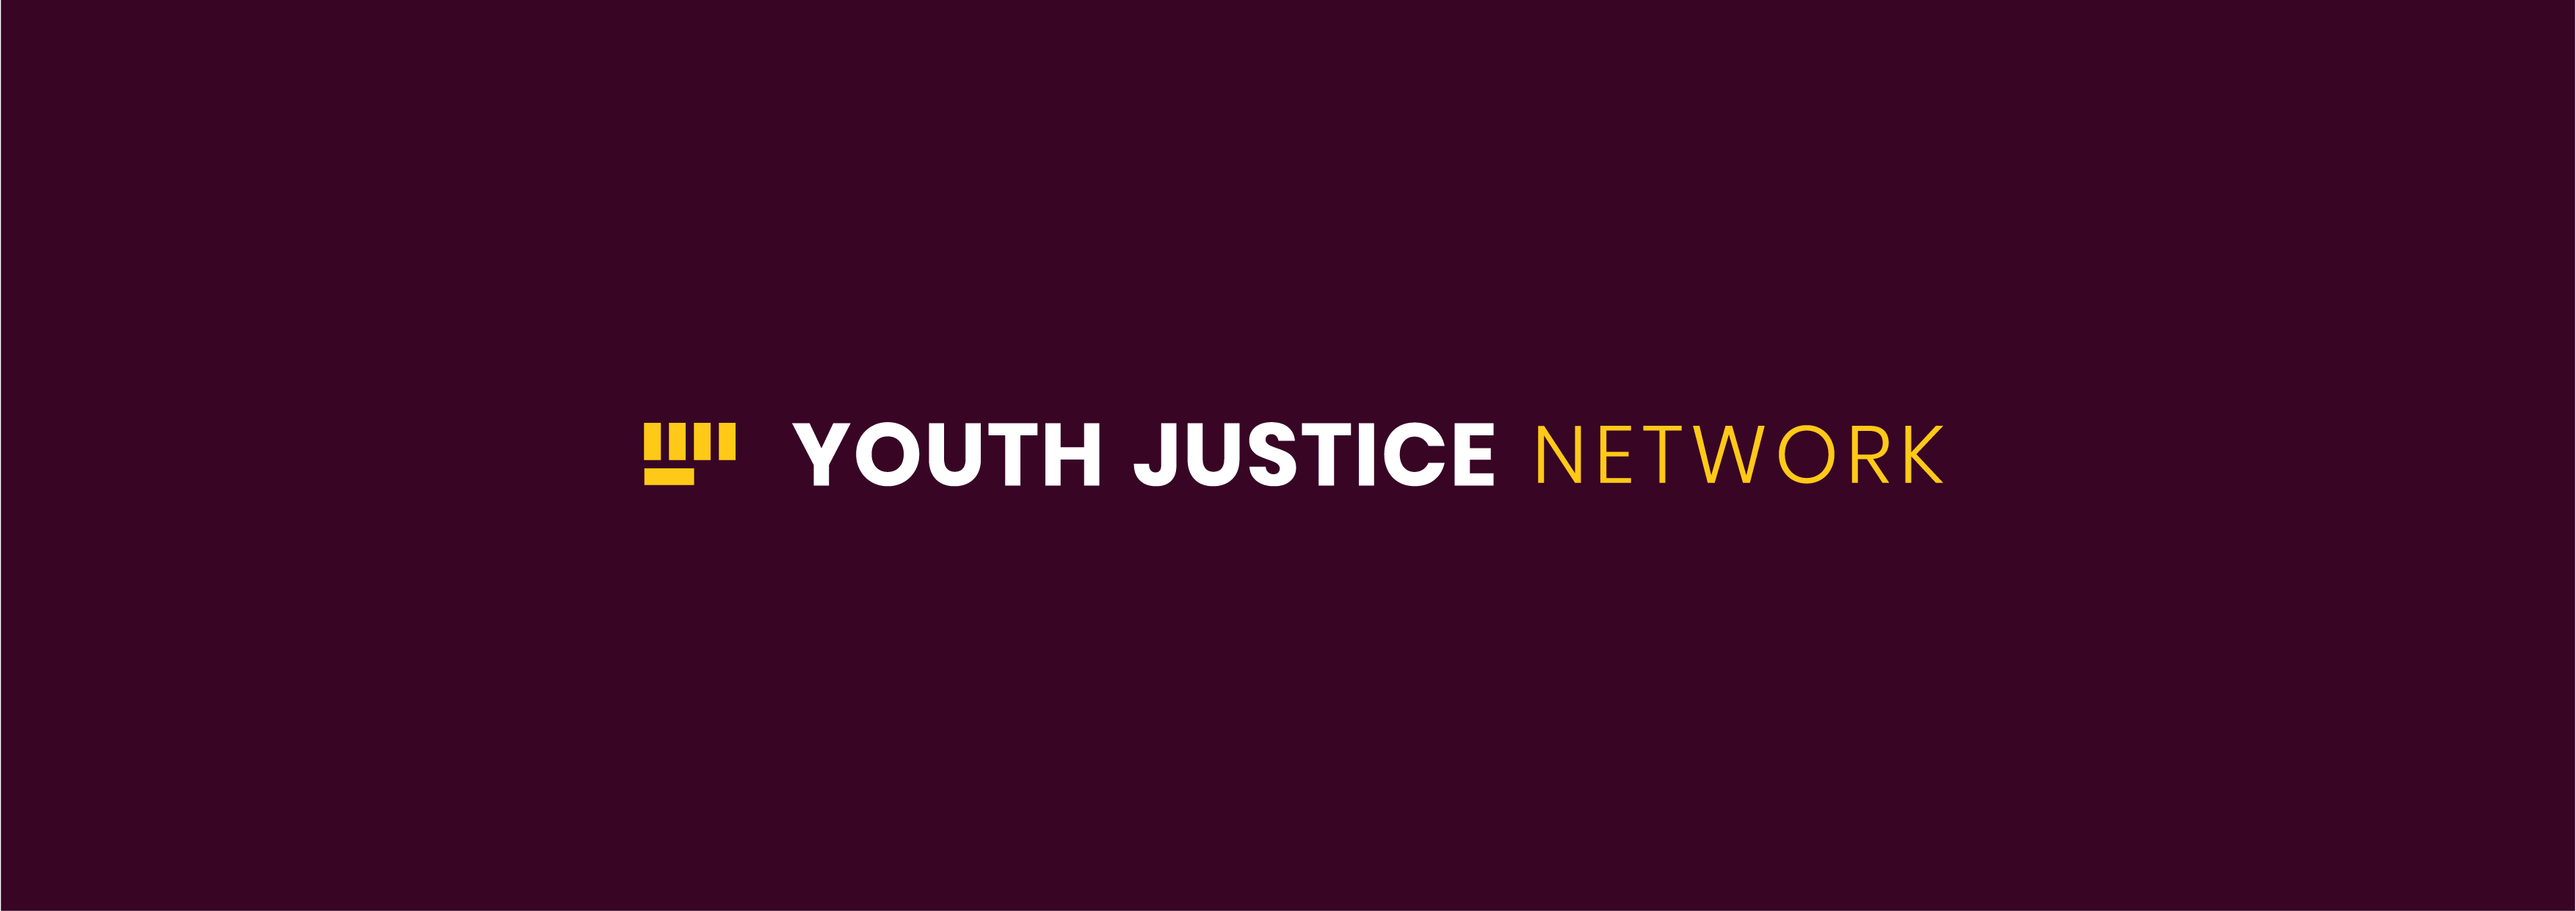 Youth Justice Network